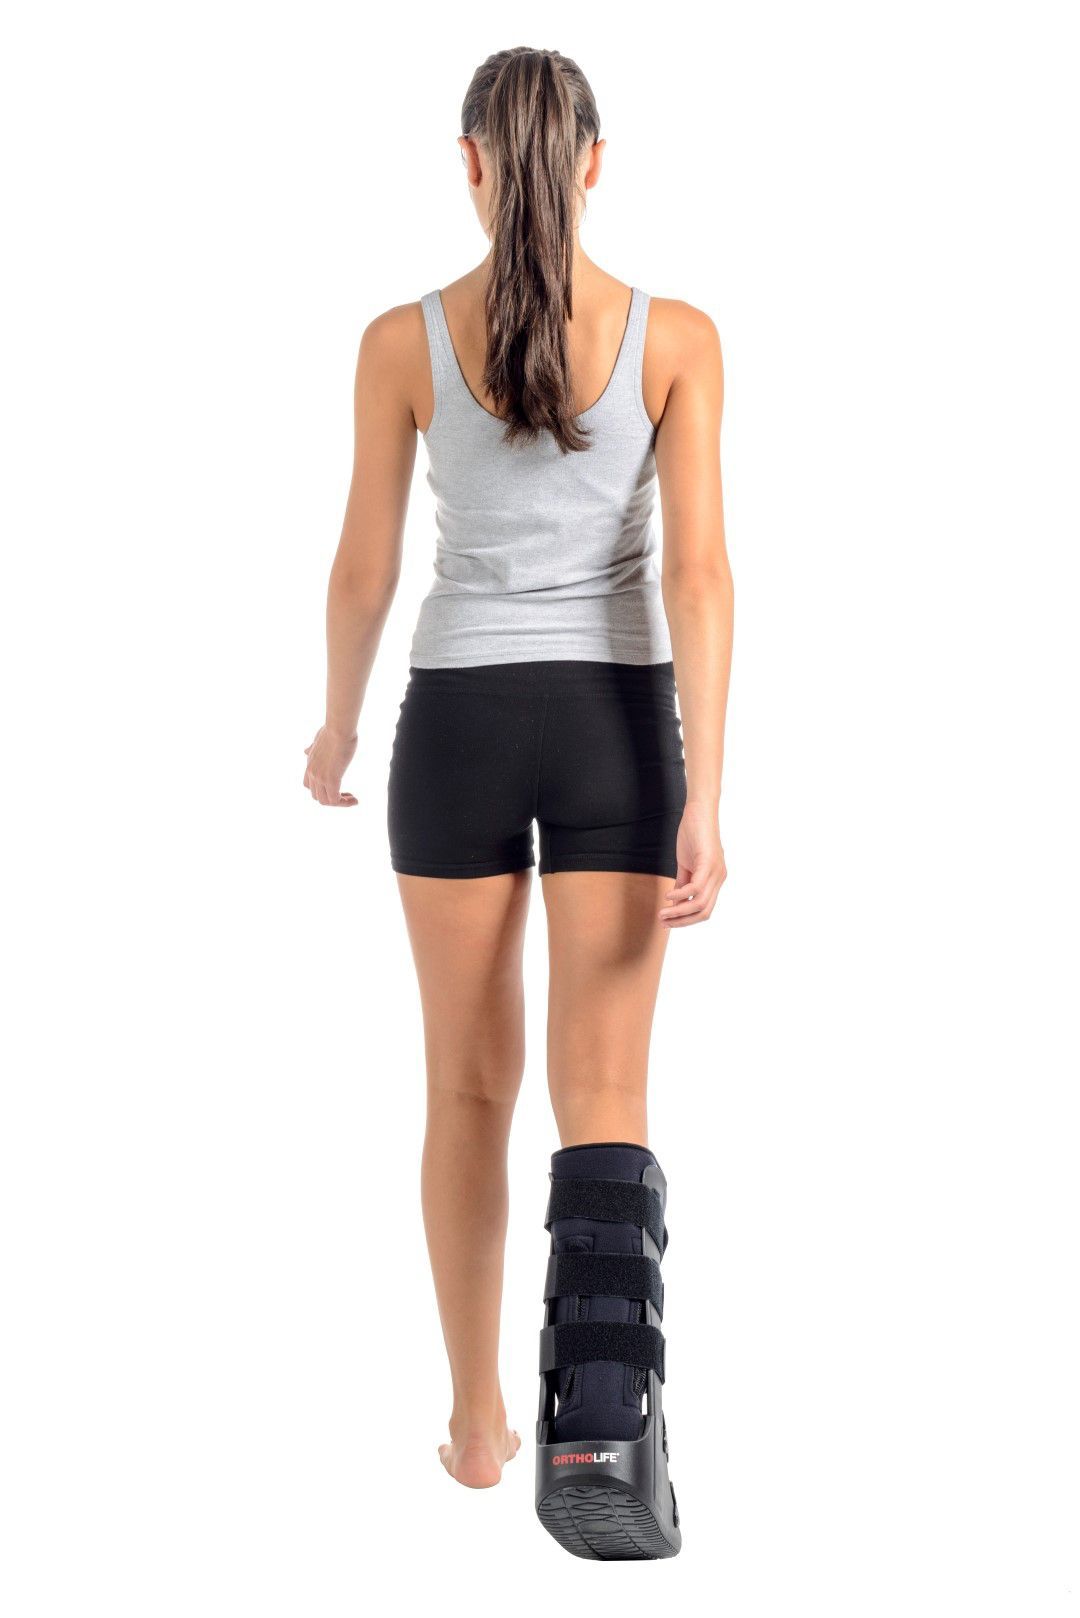 ORTHOLIFE ACUMOVE LOW-RISE AIR WALKERS photo